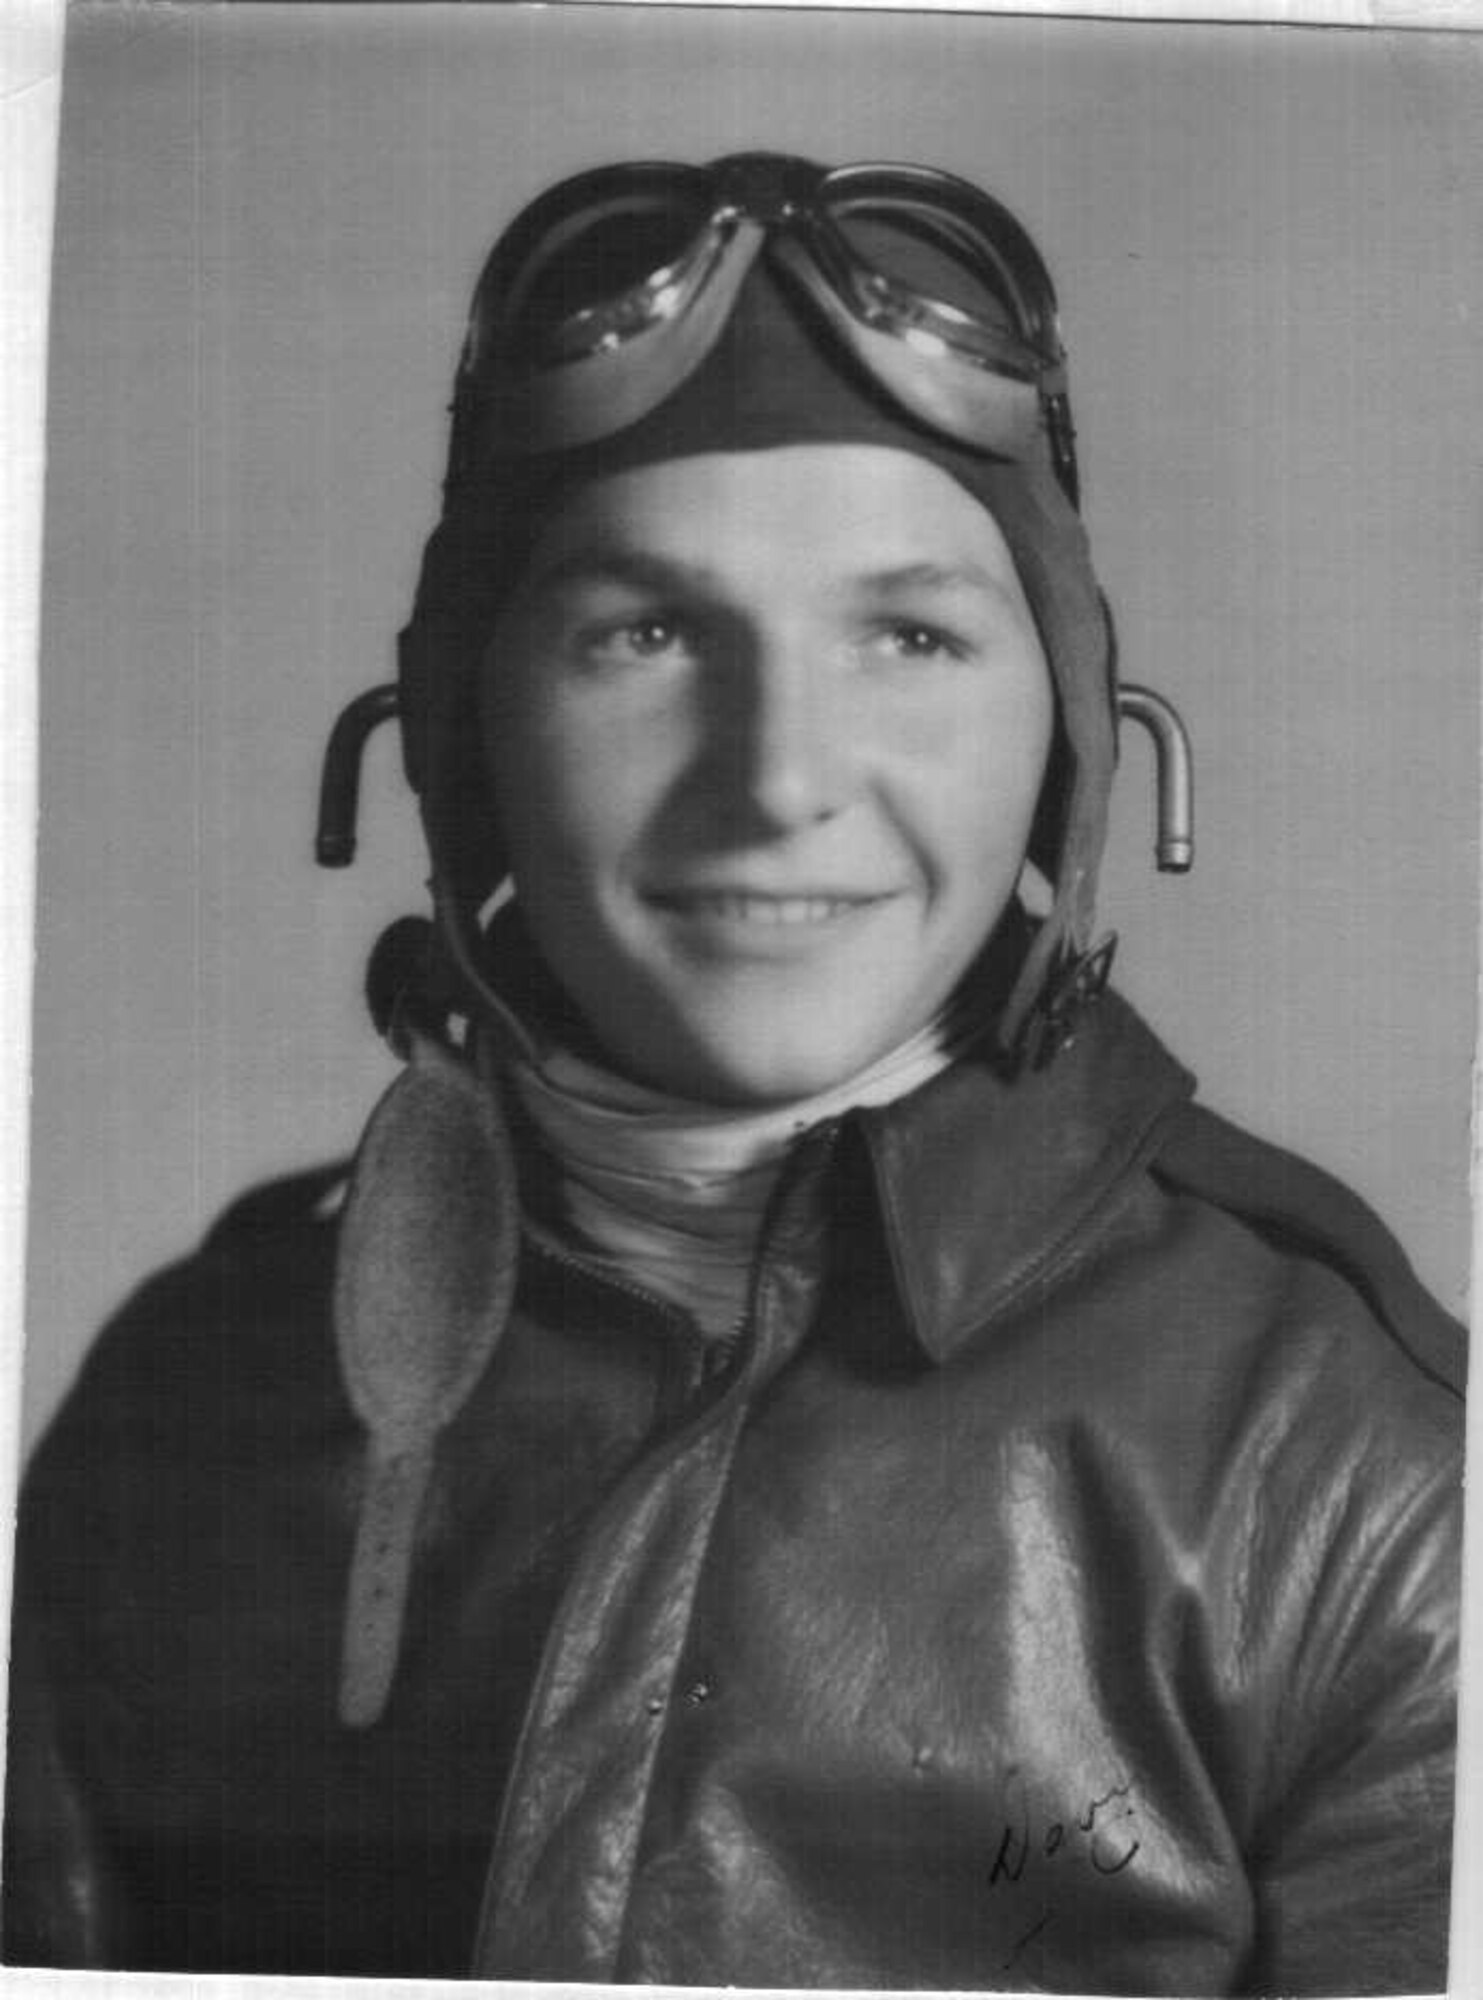 Lt. David Mondt was a C-47 Pilot with the 62nd Airlift Squadron during World War II. He flew during Operation Husky, Operation Neptune (D-Day) and Operation Market. (Courtesy photo)